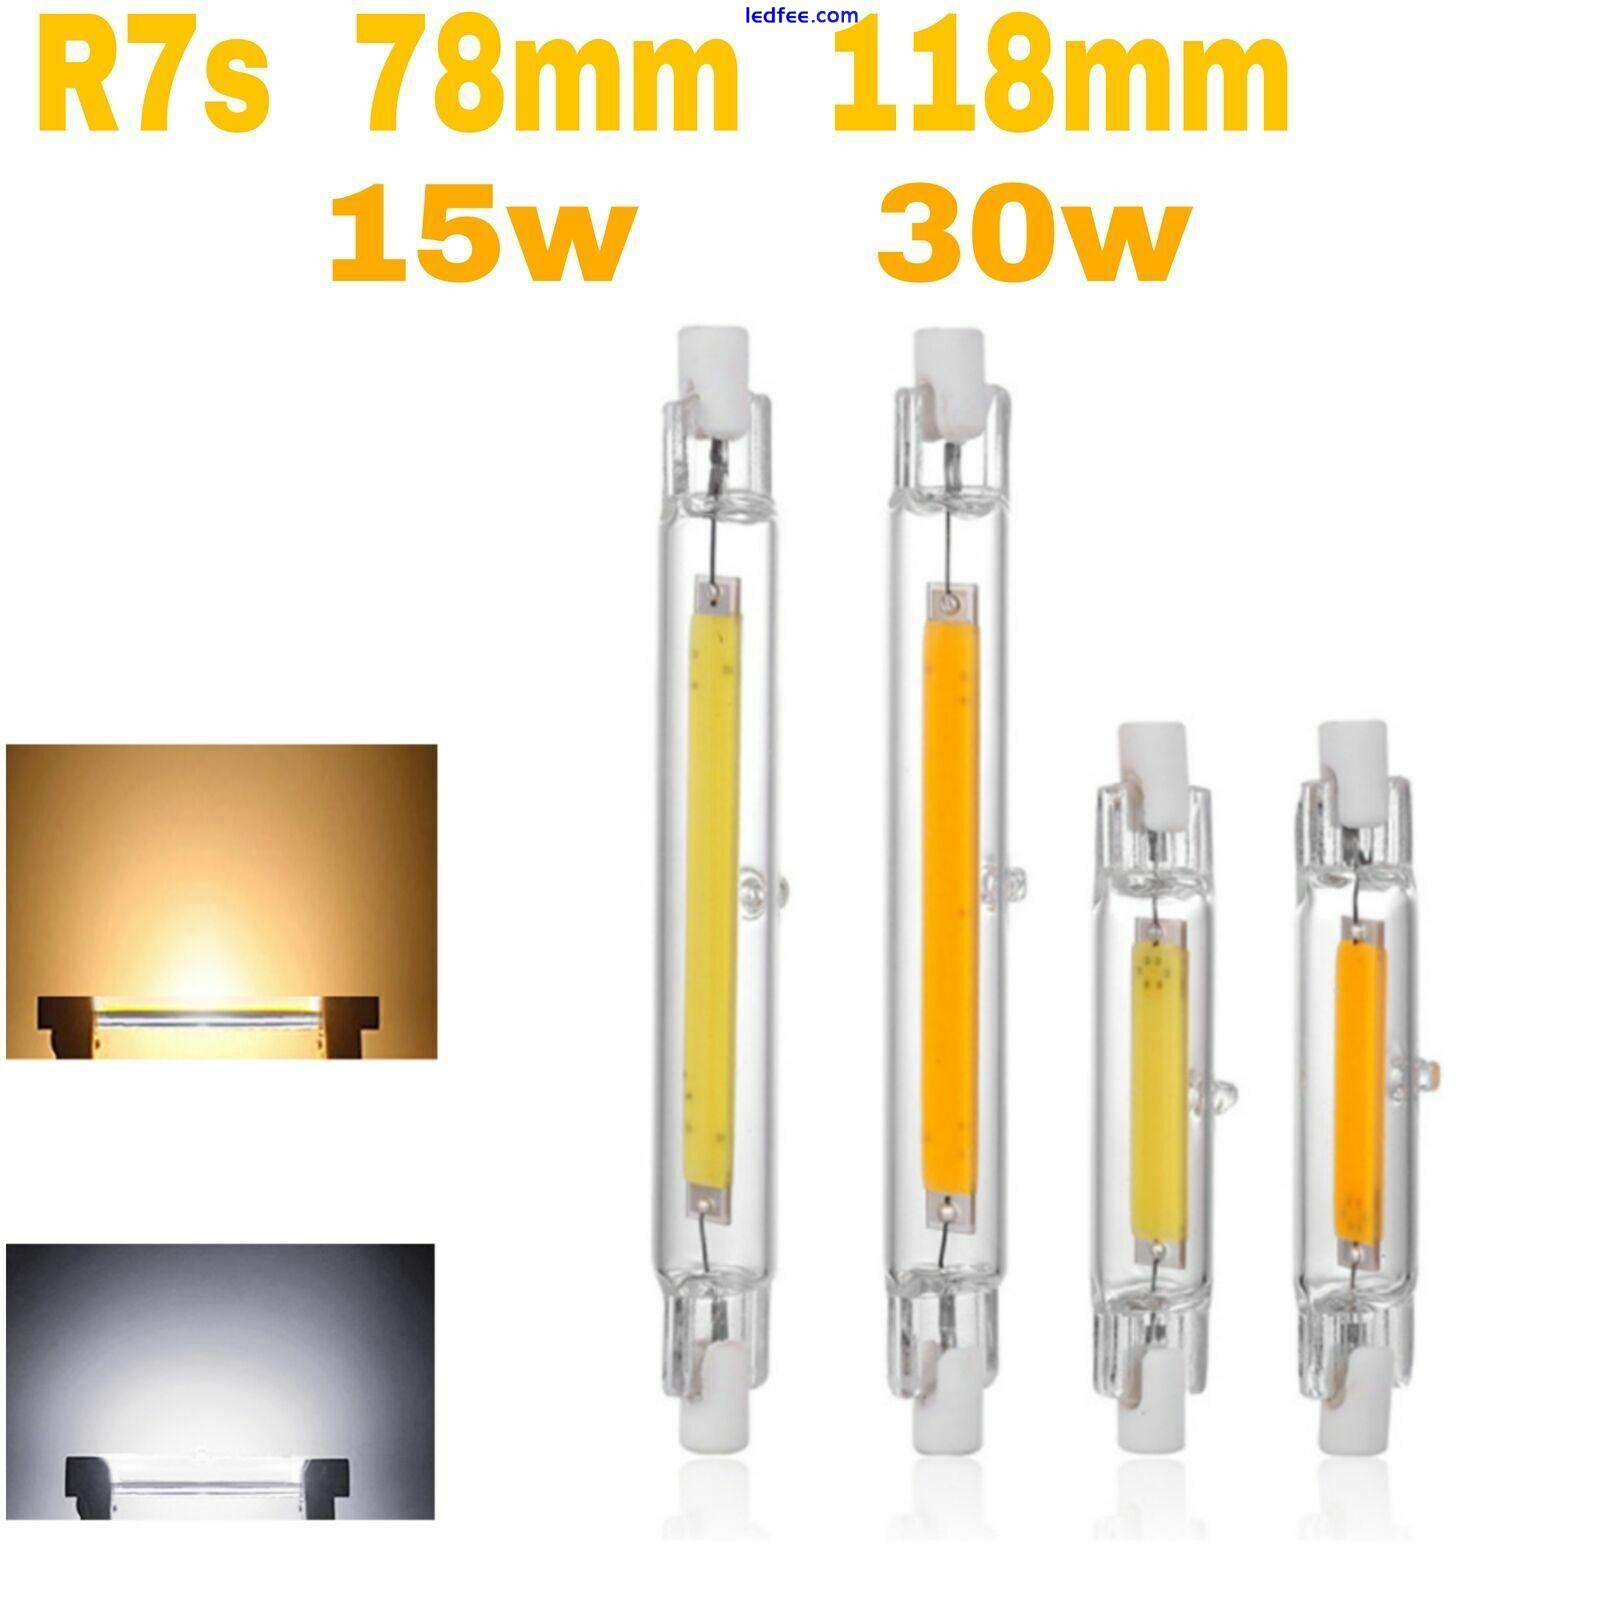 Halogen Lamp R7S LED COB 30W 15W  Dimmable Glass Replace 118mm 78mm Incandescent 2 